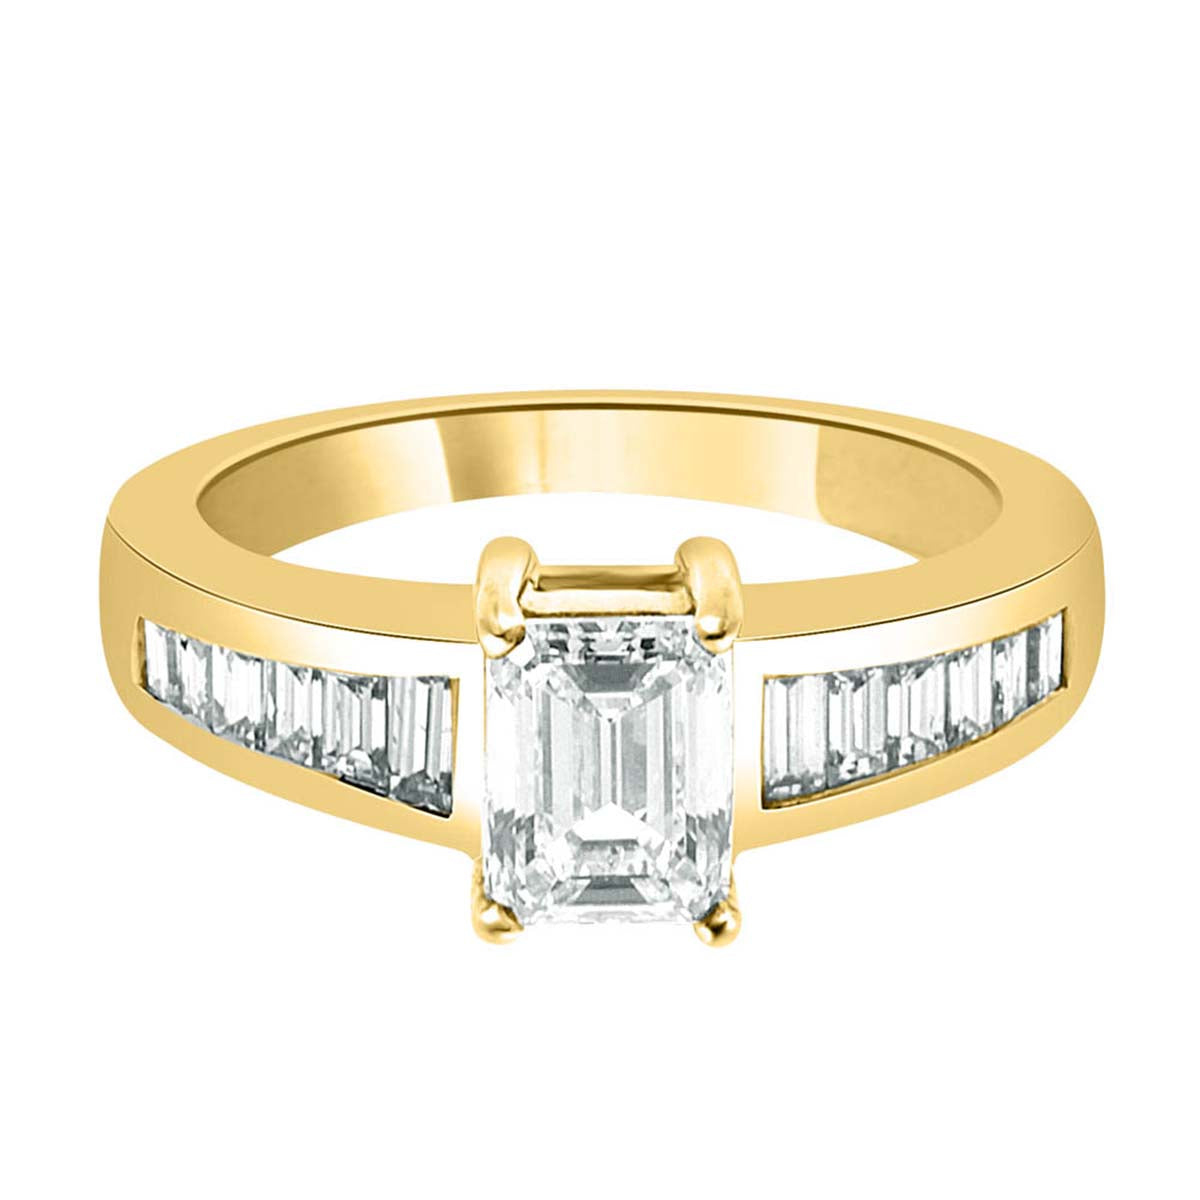 Emerald Cut Engagement Ring made from yellow gold 